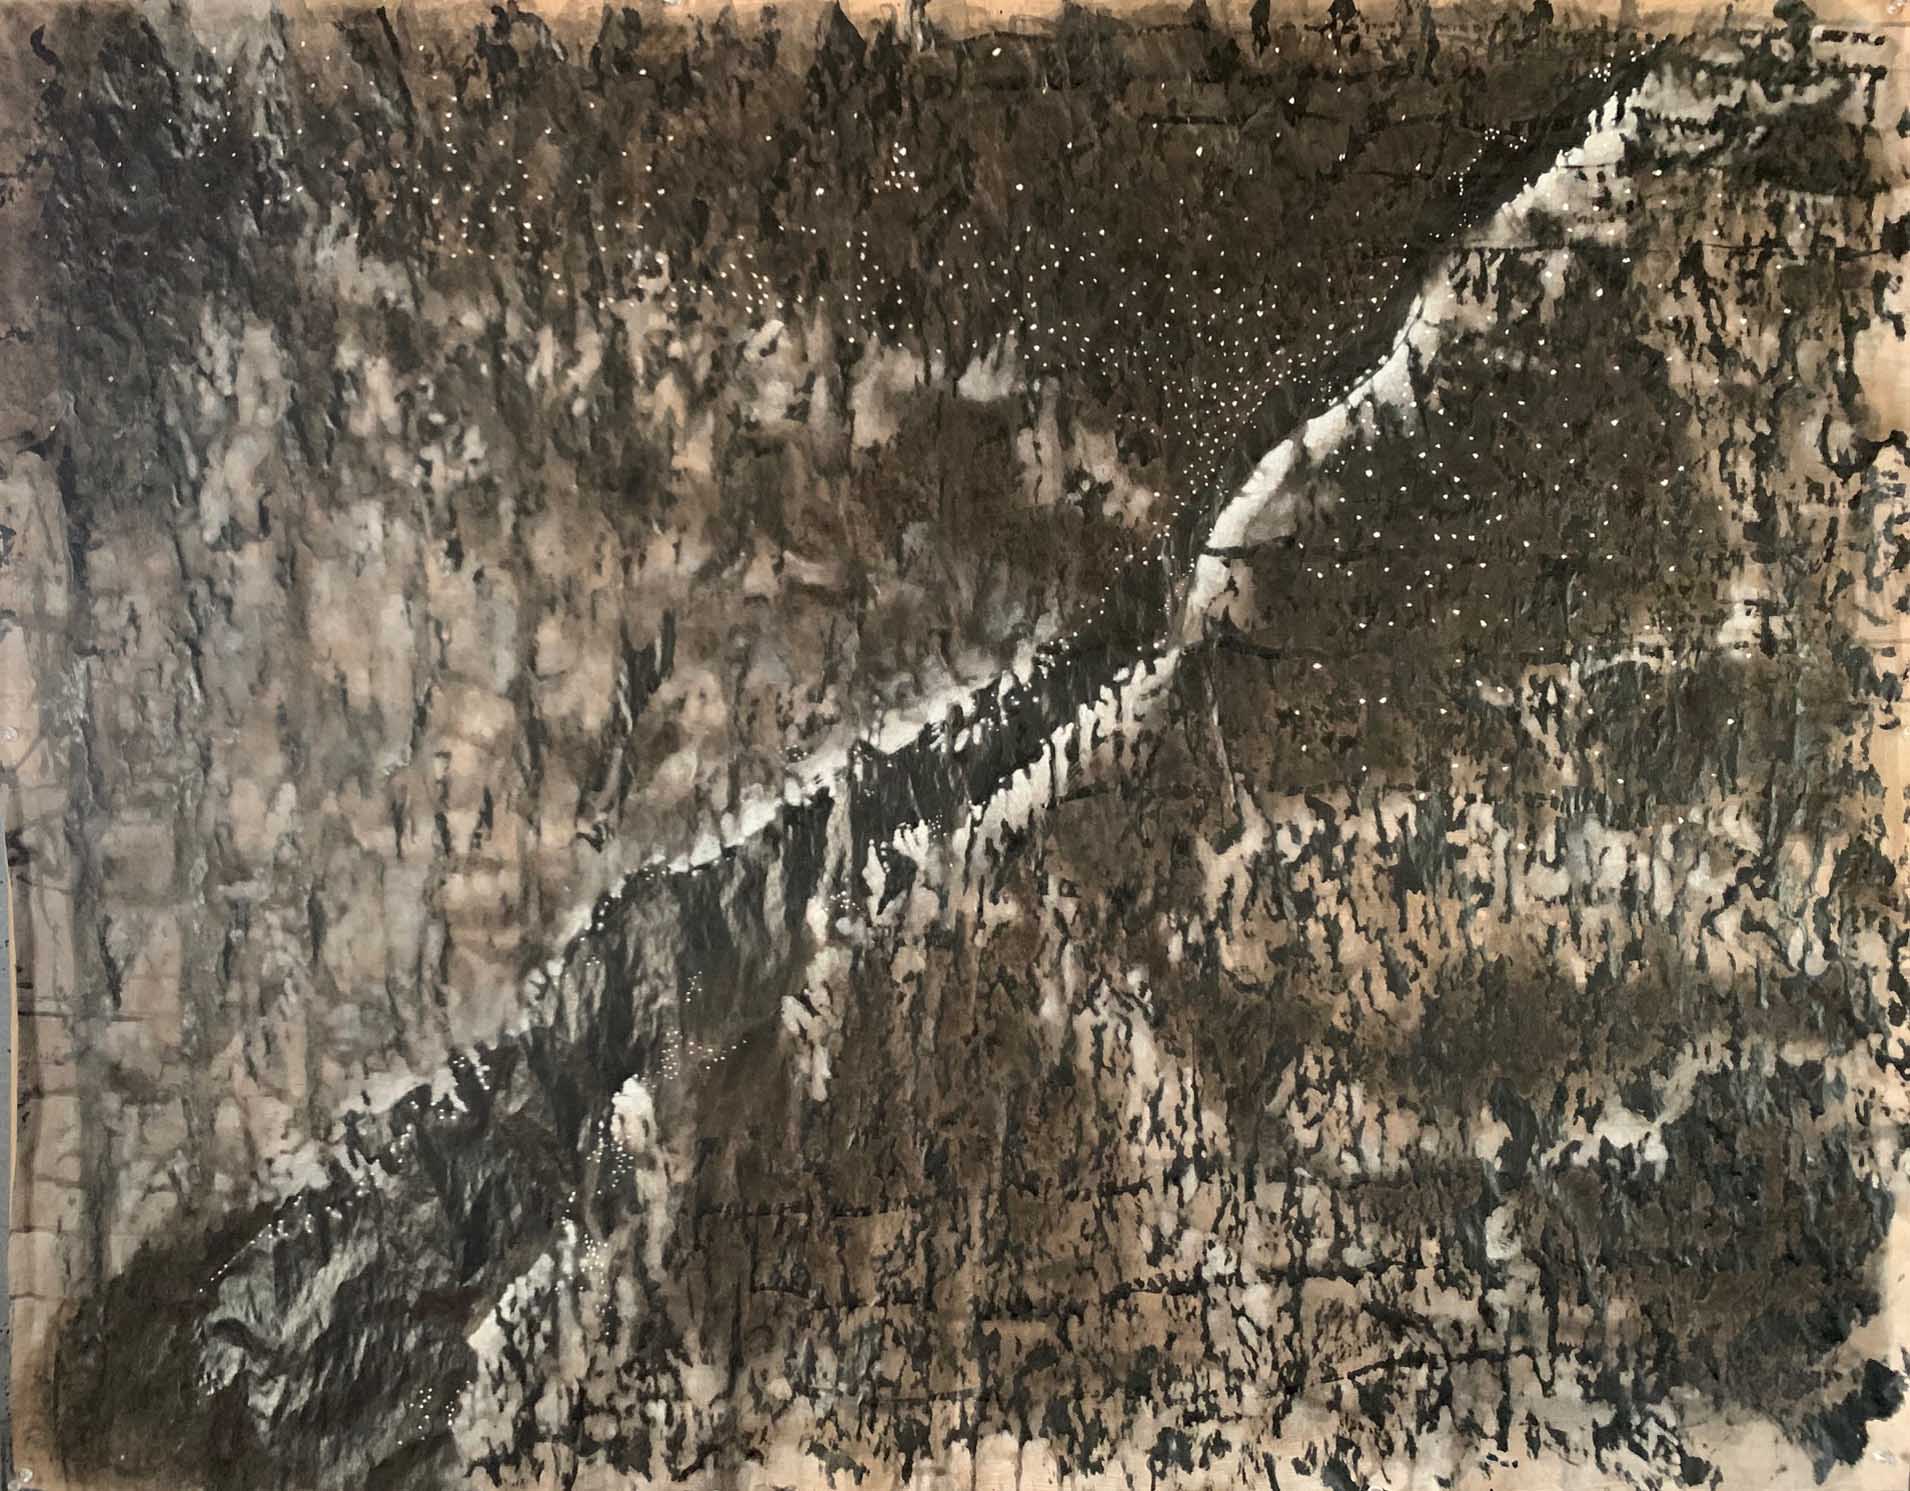 TAKAHASHI_JULIA_ink study 9_ink, pastel, oil bar on paper_60 x 26 inches